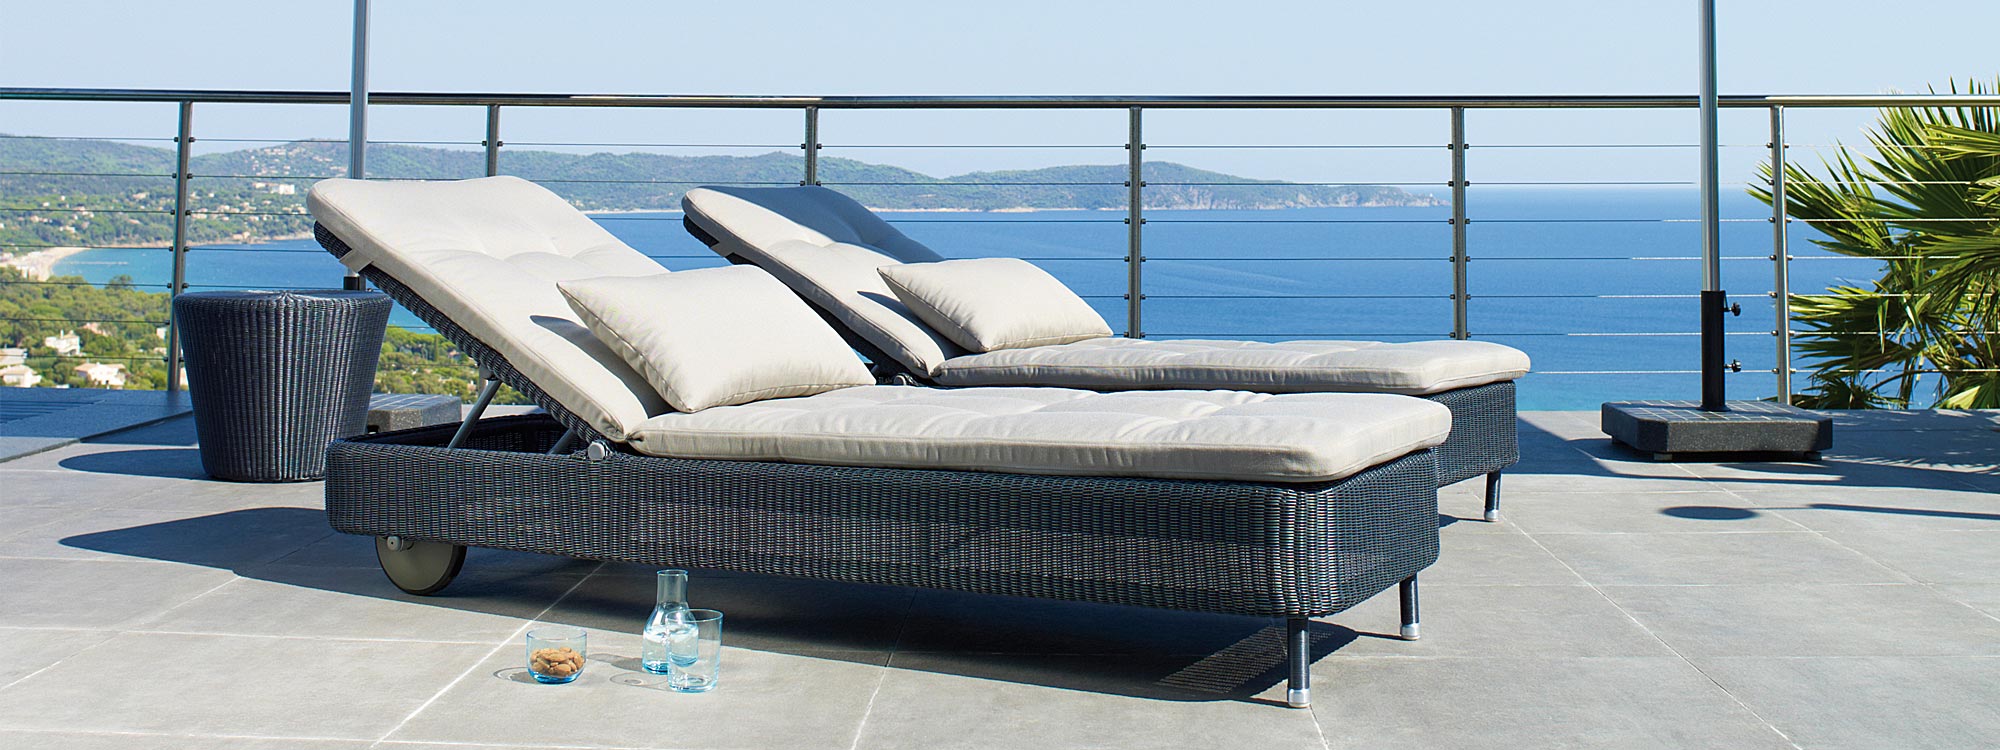 Presley all-weather rattan sun lounger is a fully adjustable classic woven sunbed by Cane-line luxury rattan outdoor furniture company.